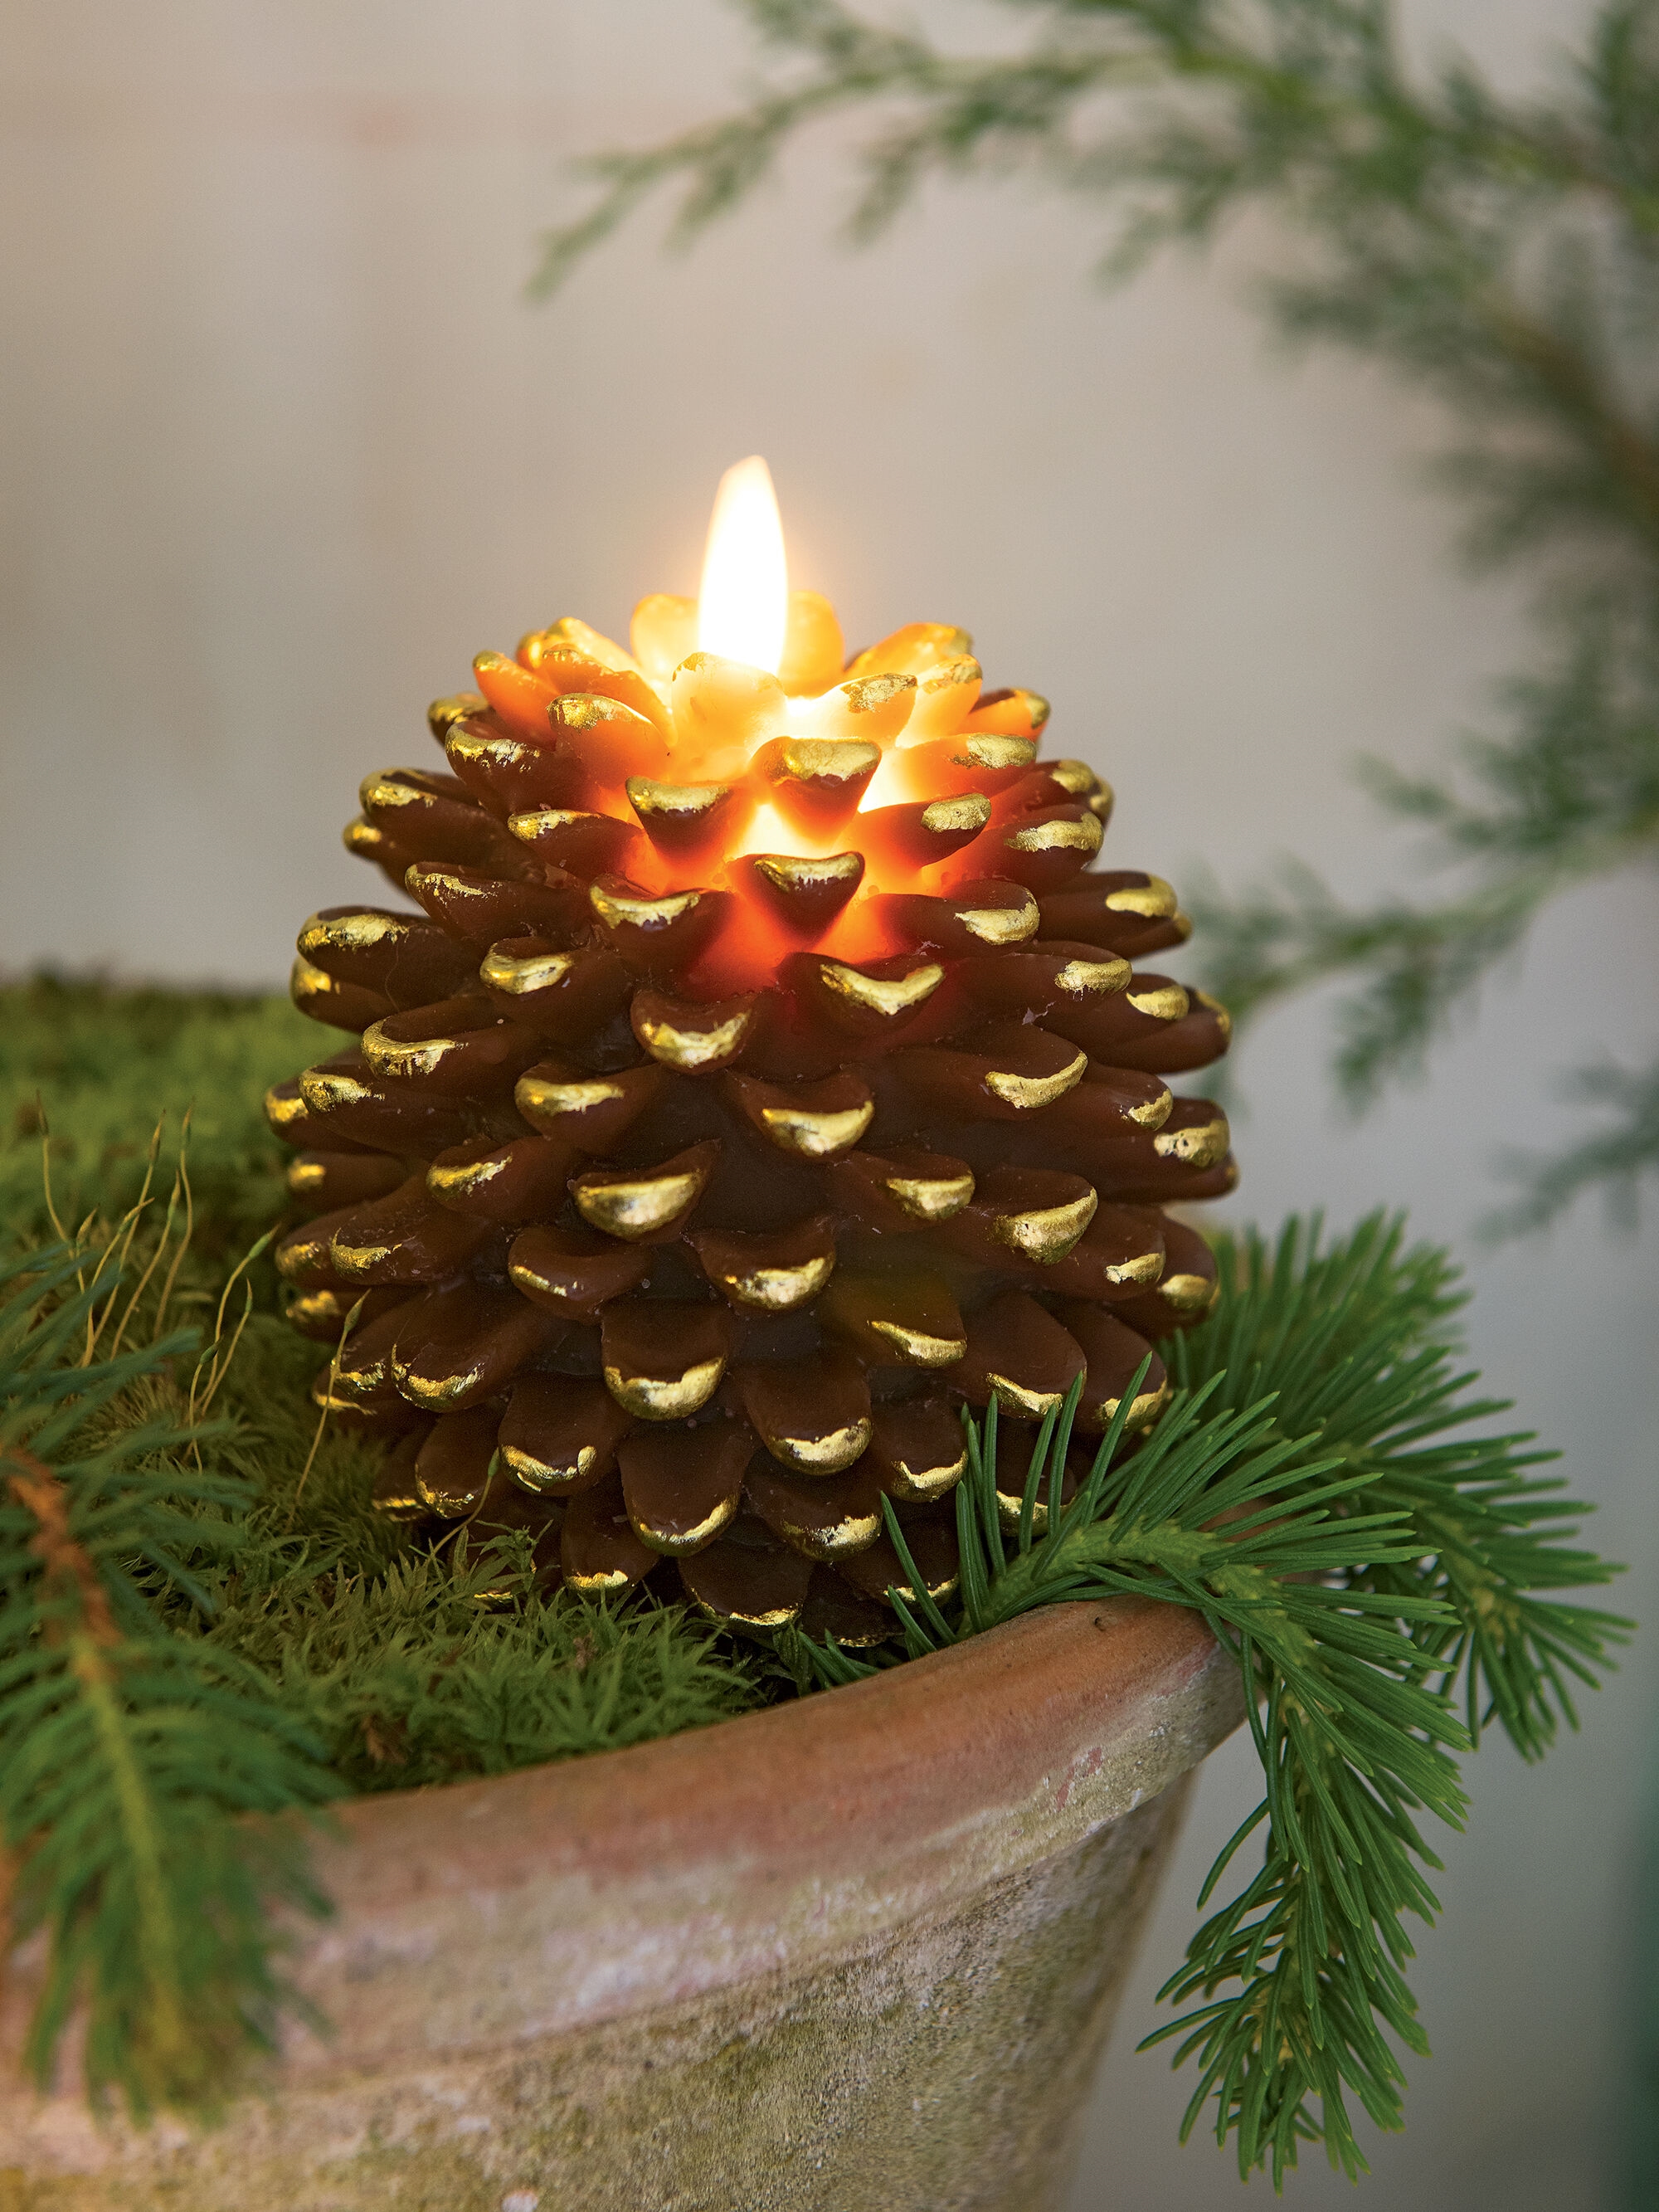 Wax Pinecone Flame Effect LED Candle | Gardeners.com